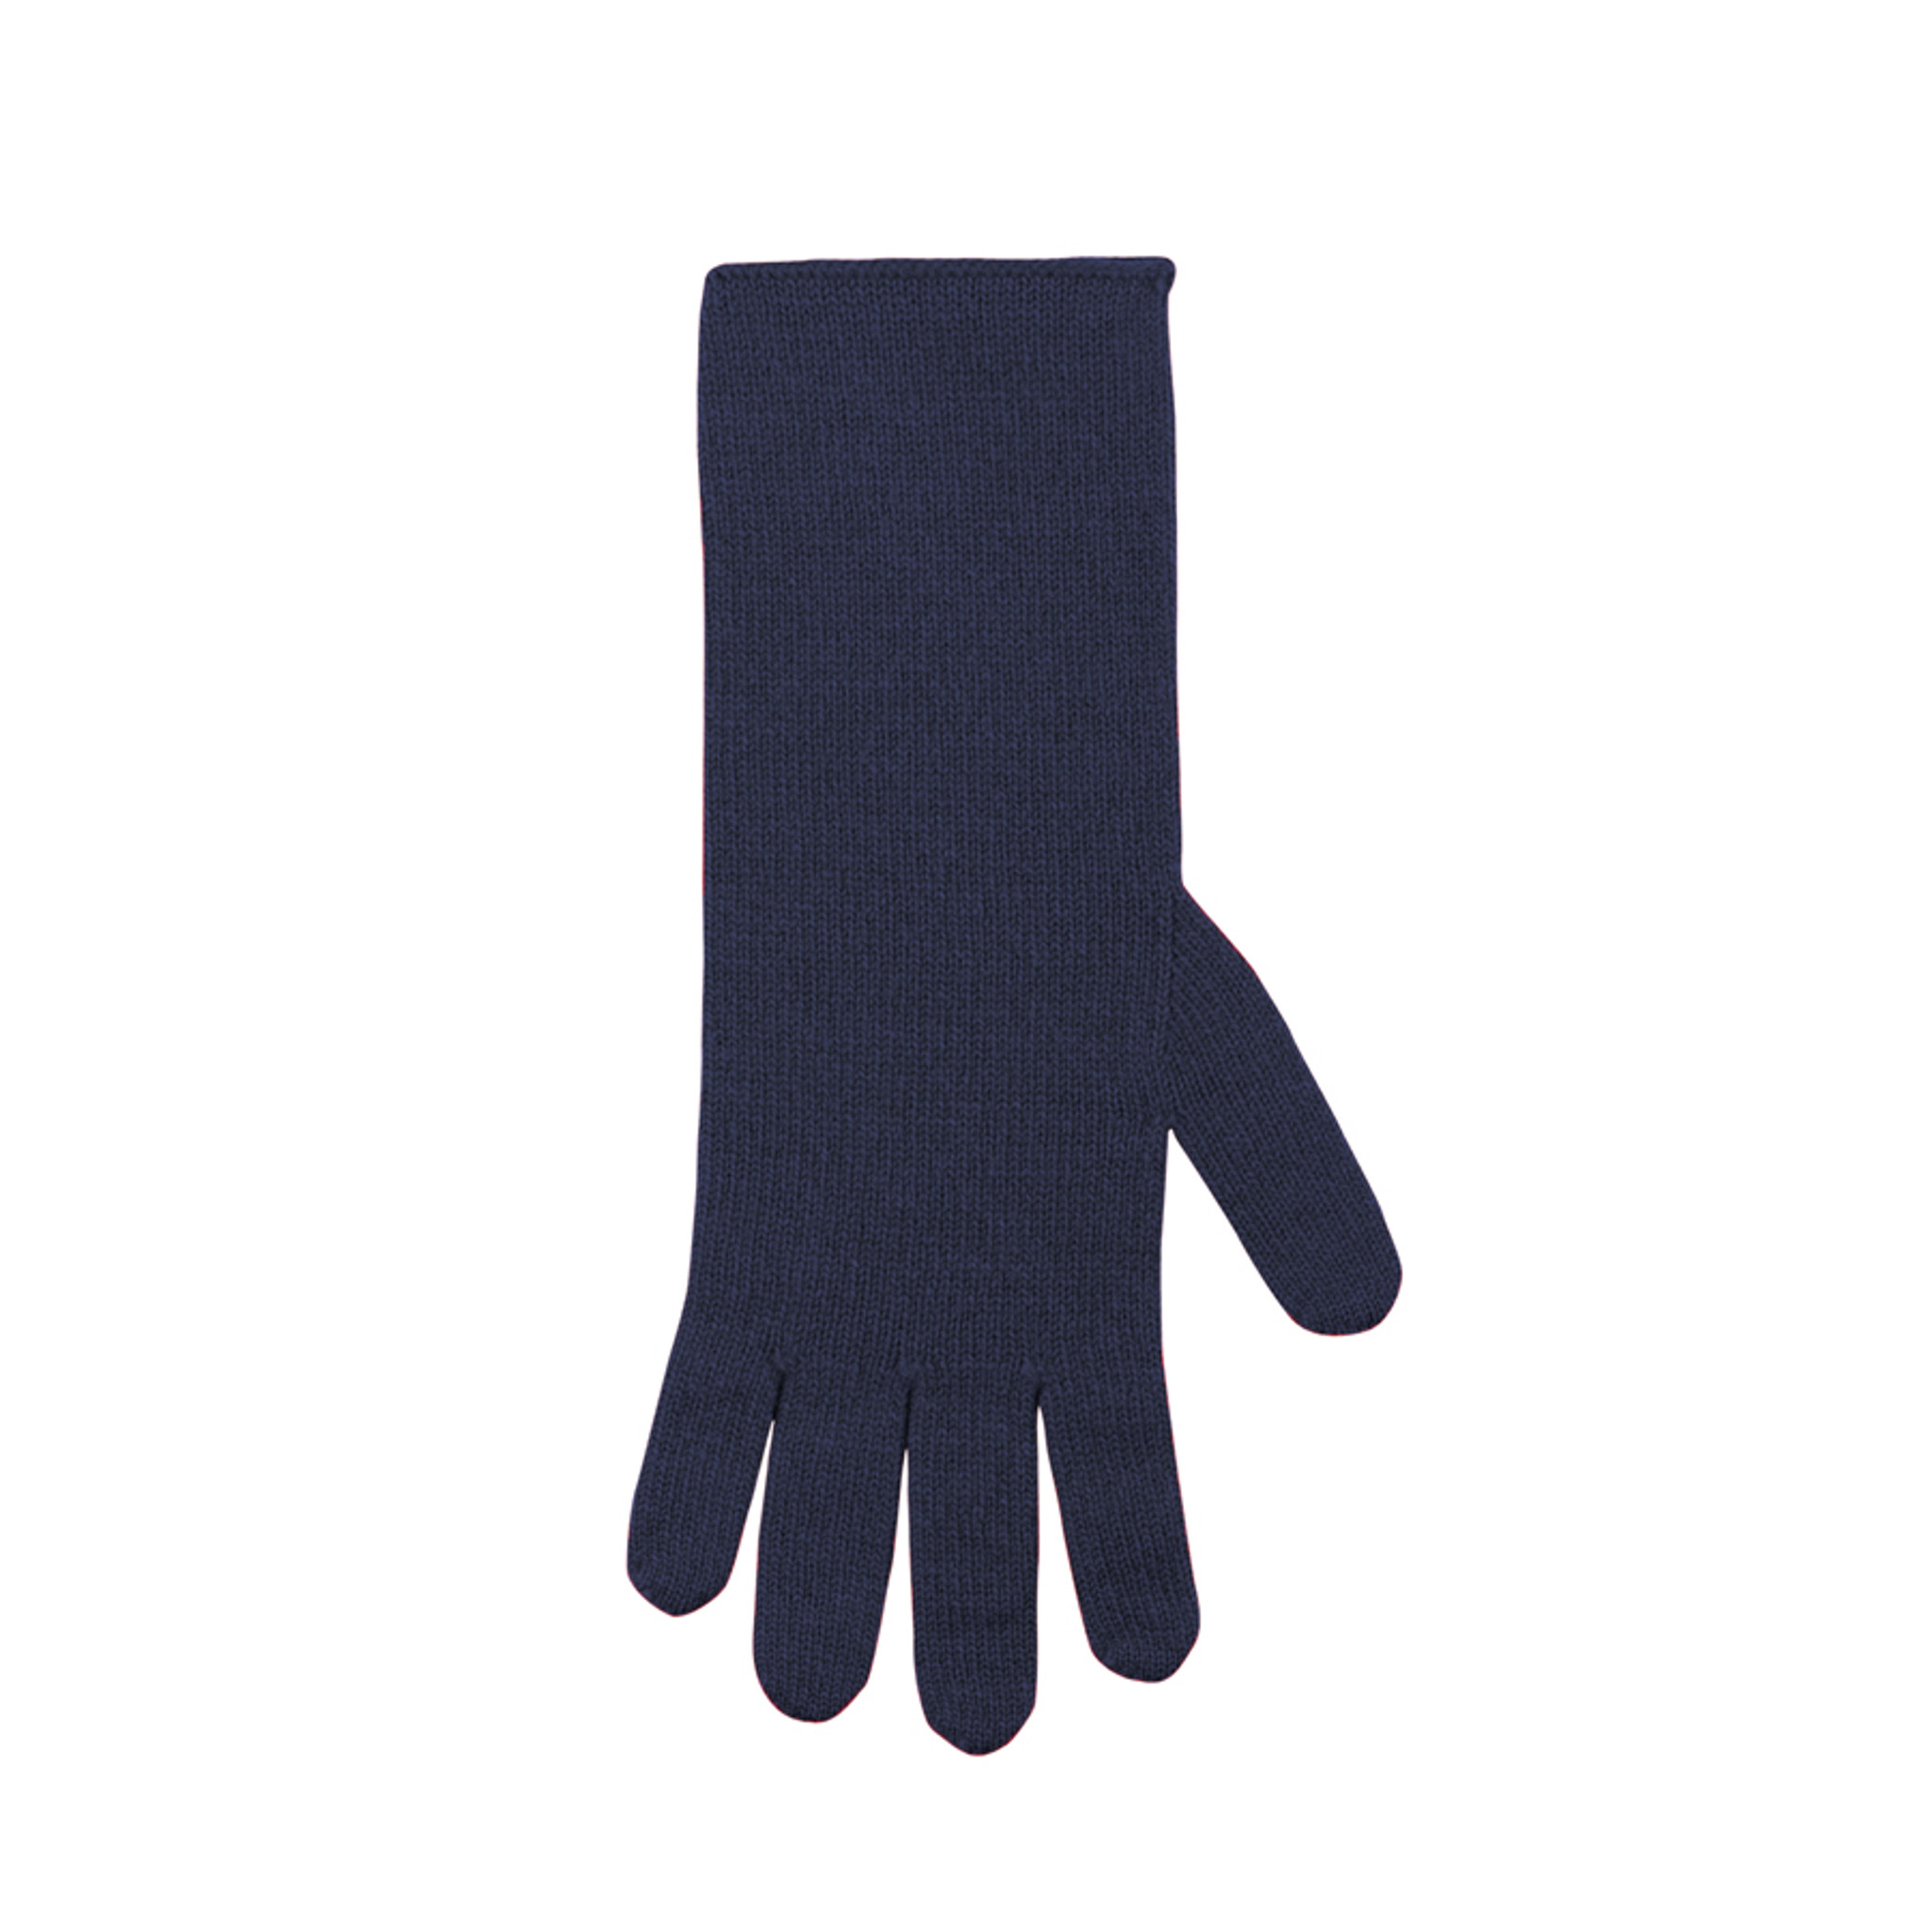 Cashmere gloves for women, soft stylish and warm cashmere gloves in ma